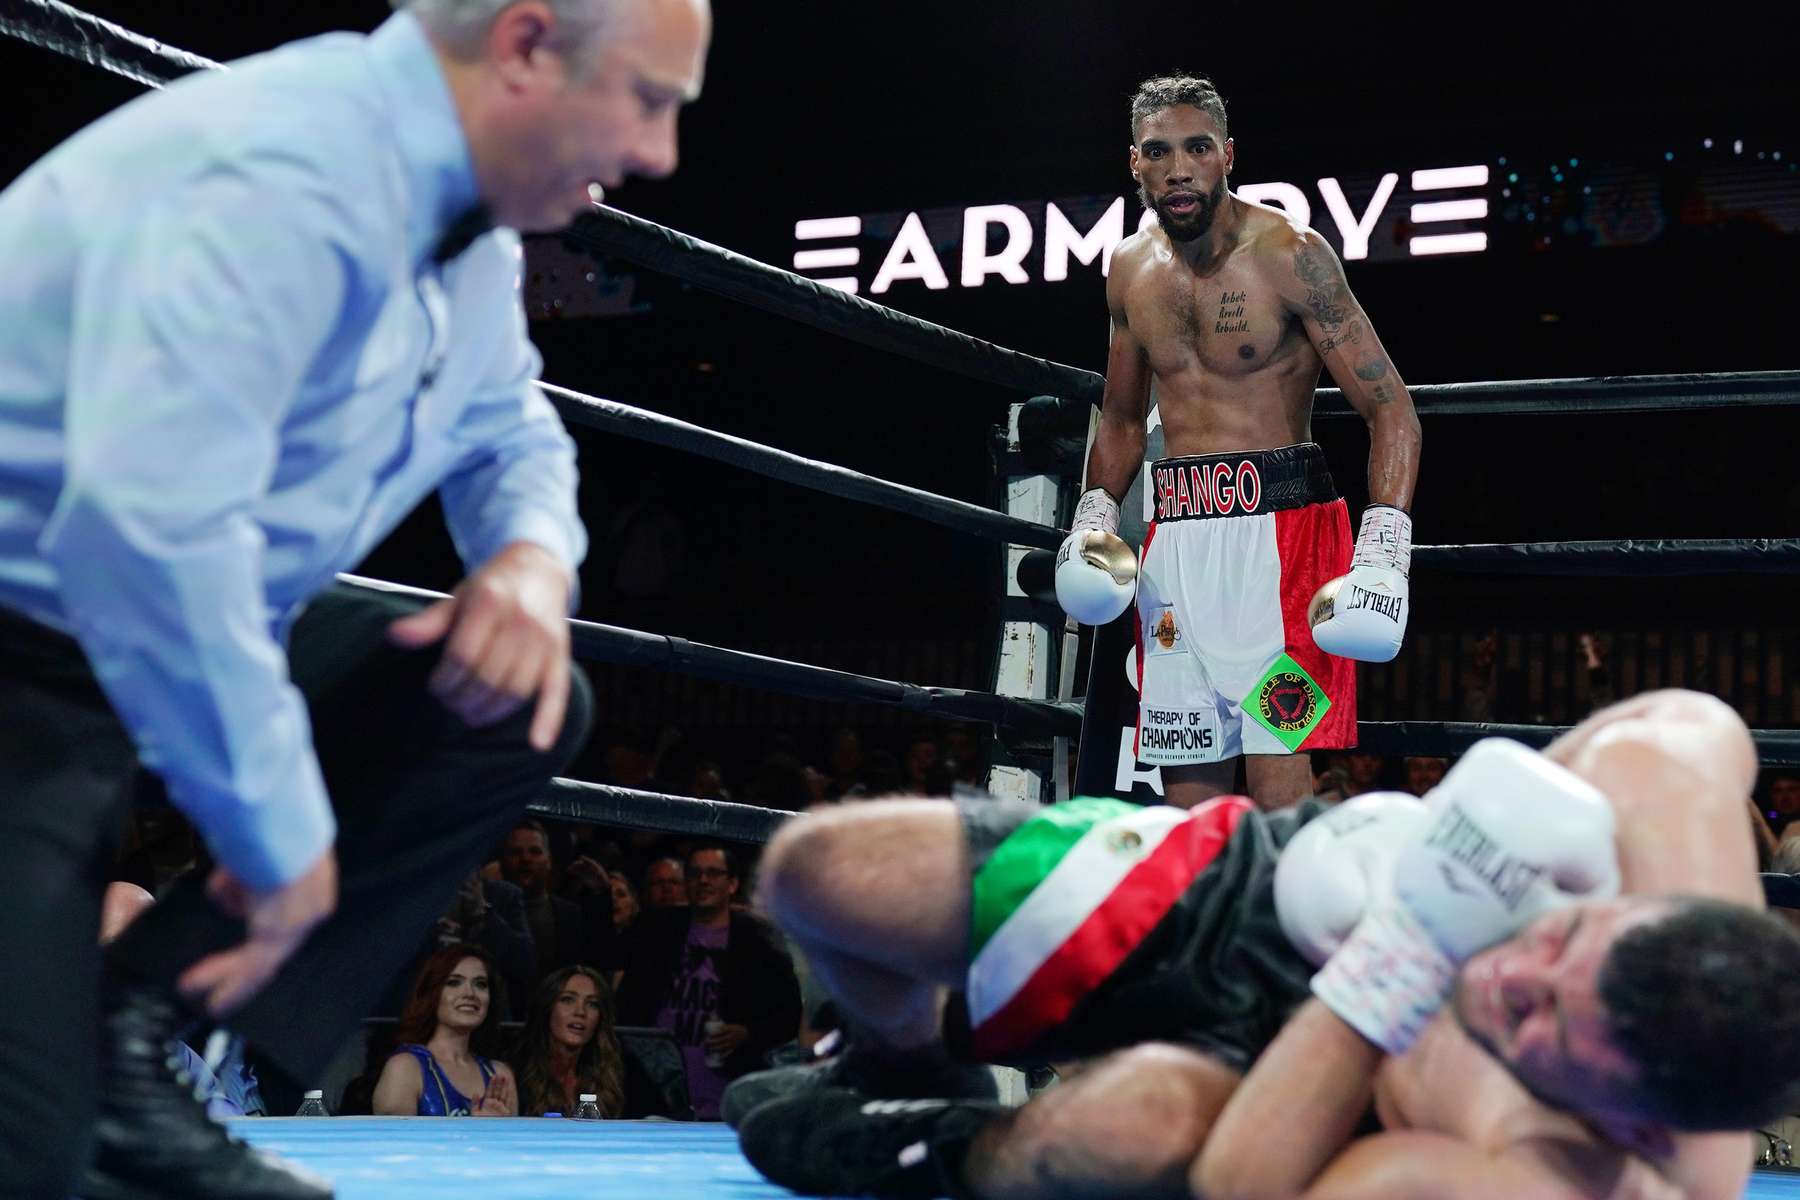 Minneapolis' Jamal James reacted after he knocked out his opponent Mahonry Montes in the welterweights class during the Premier Boxing Champions at The Armory in Minneapolis.